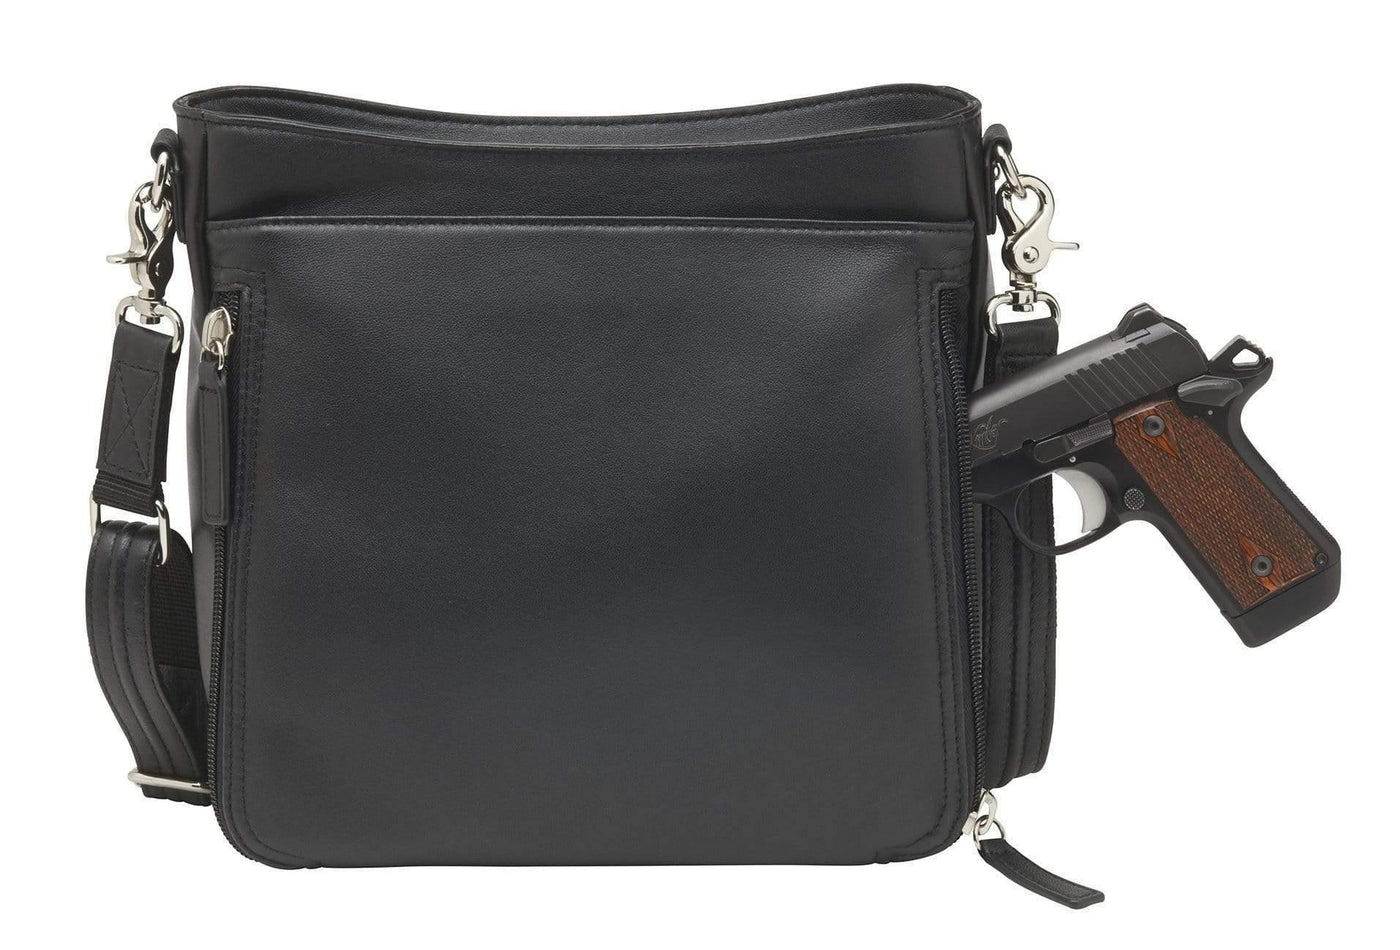 Gun Tote'n Mamas Concealed Carry Purse Concealed Carry Black Lambskin Organizer Bag - GTM/LMB-98